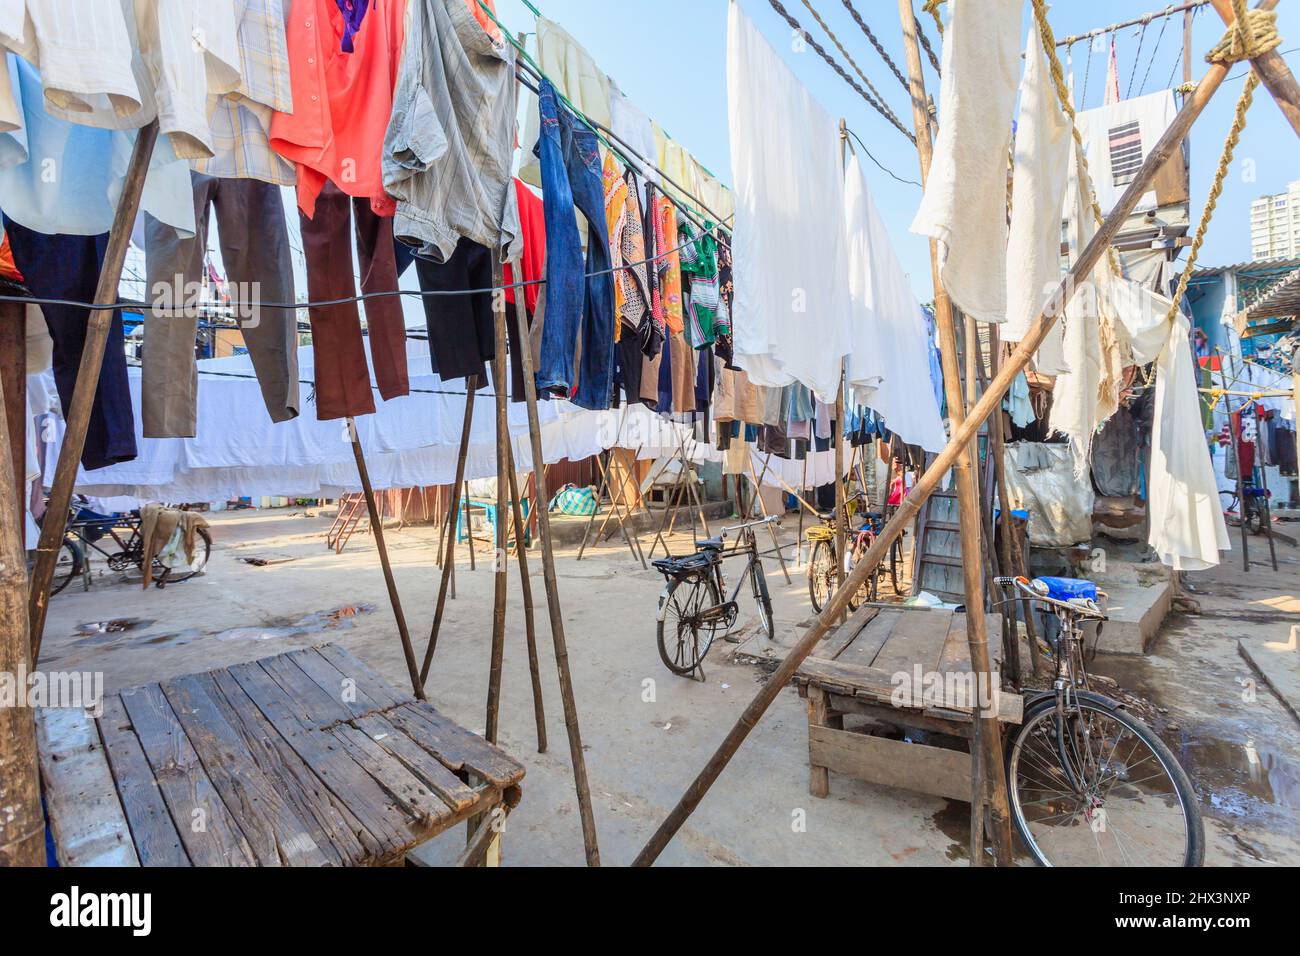 Clean fresh washed clothes hanging out to dry, drying in the sun in the open air in Mahalaxmi Dhobi Ghat, a large open air laundromat in Mumbai, India Stock Photo